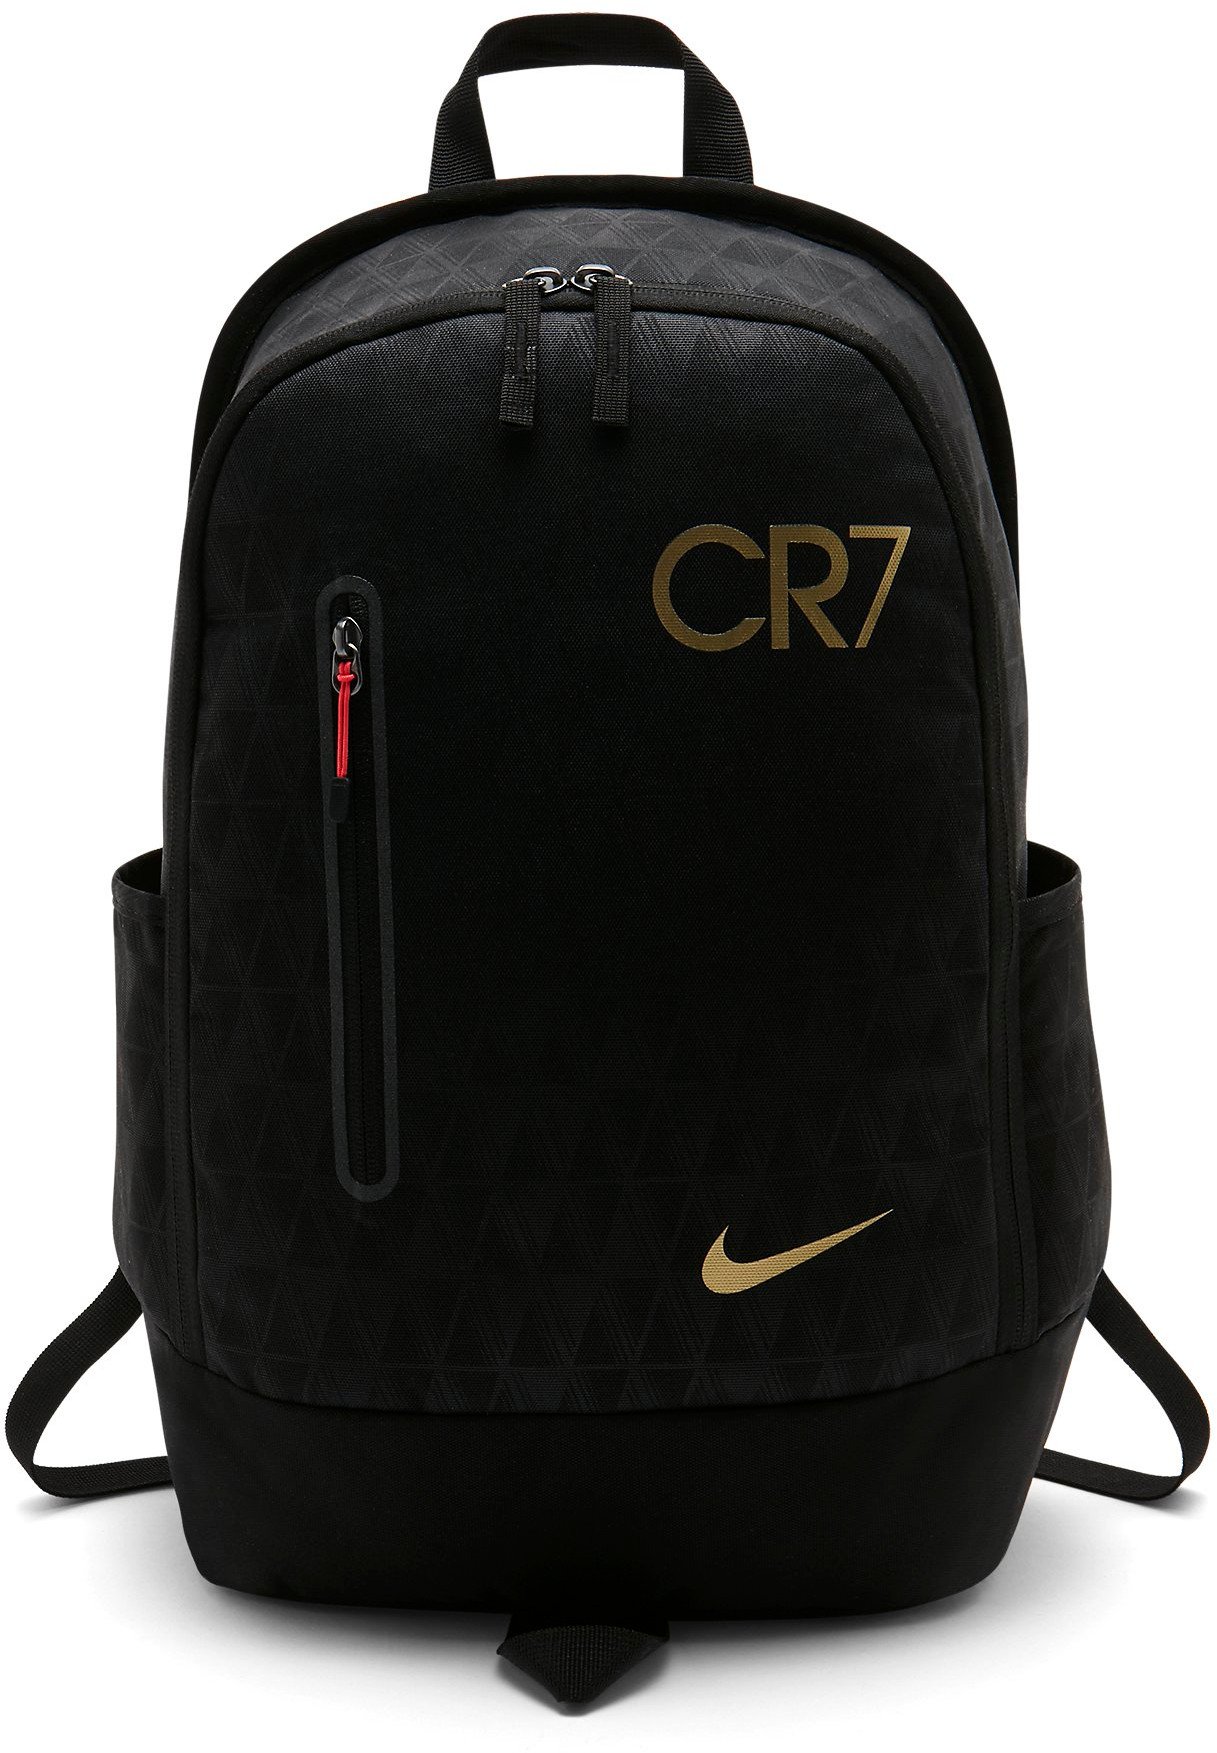 NIKE Cristiano Ronaldo CR7 soccerworkouts With images .